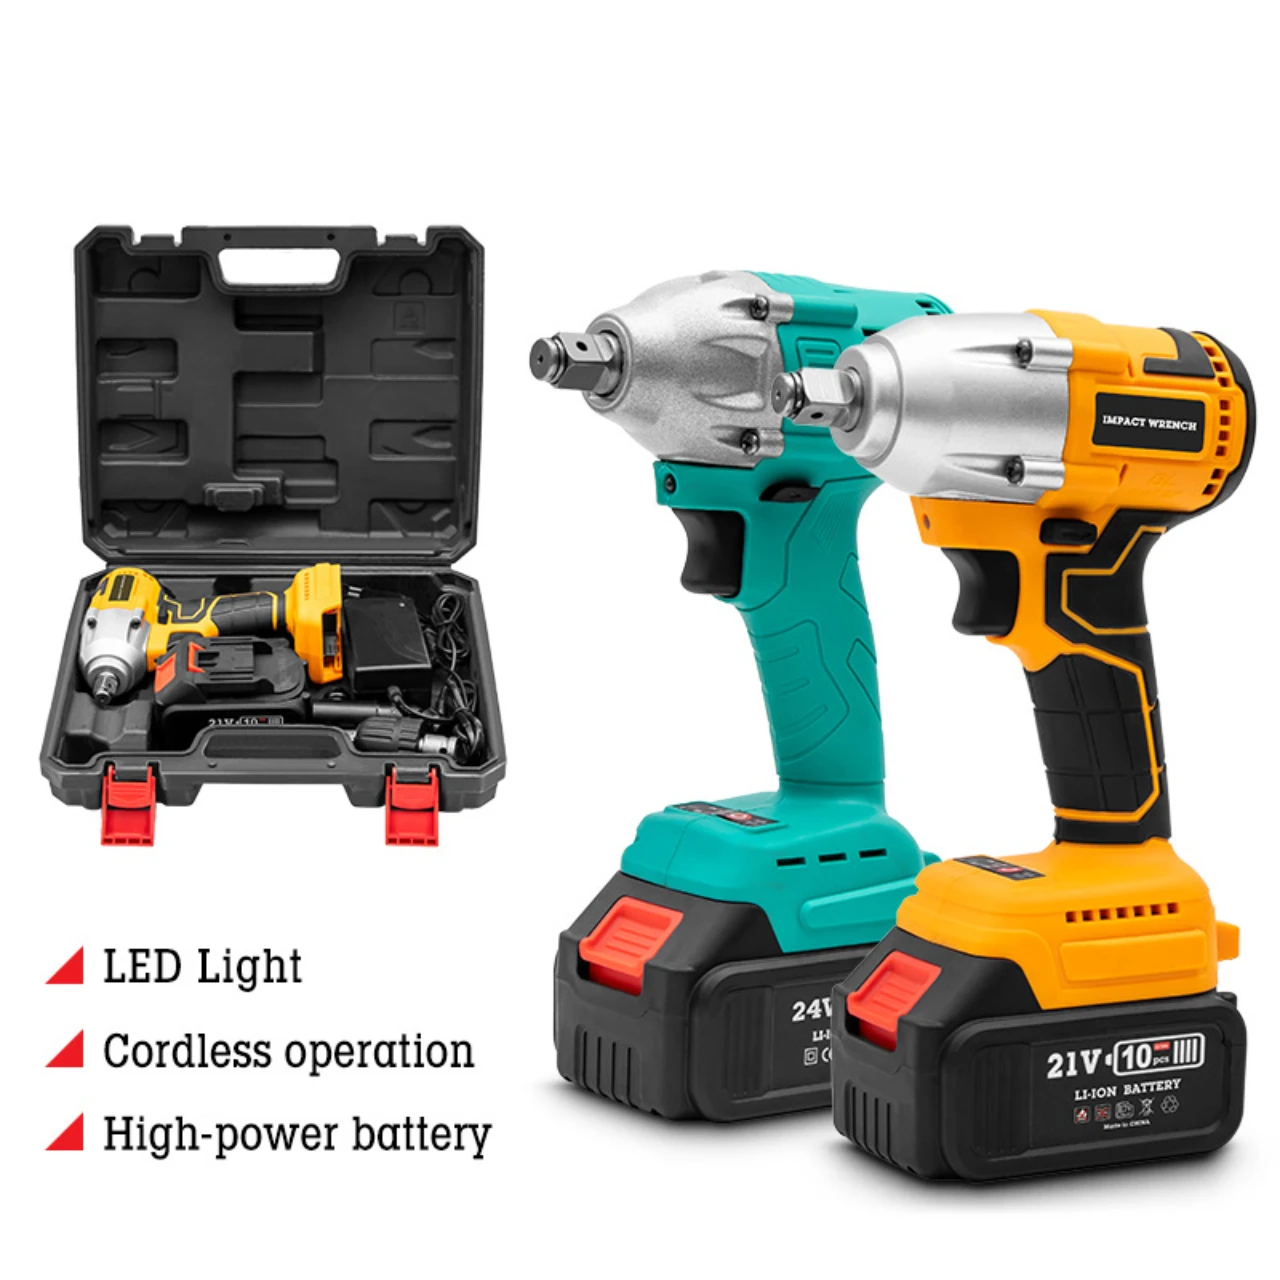 21V Cordless Impact Wrench Electric High Torque Driver Garage Power Tool DEWORX 